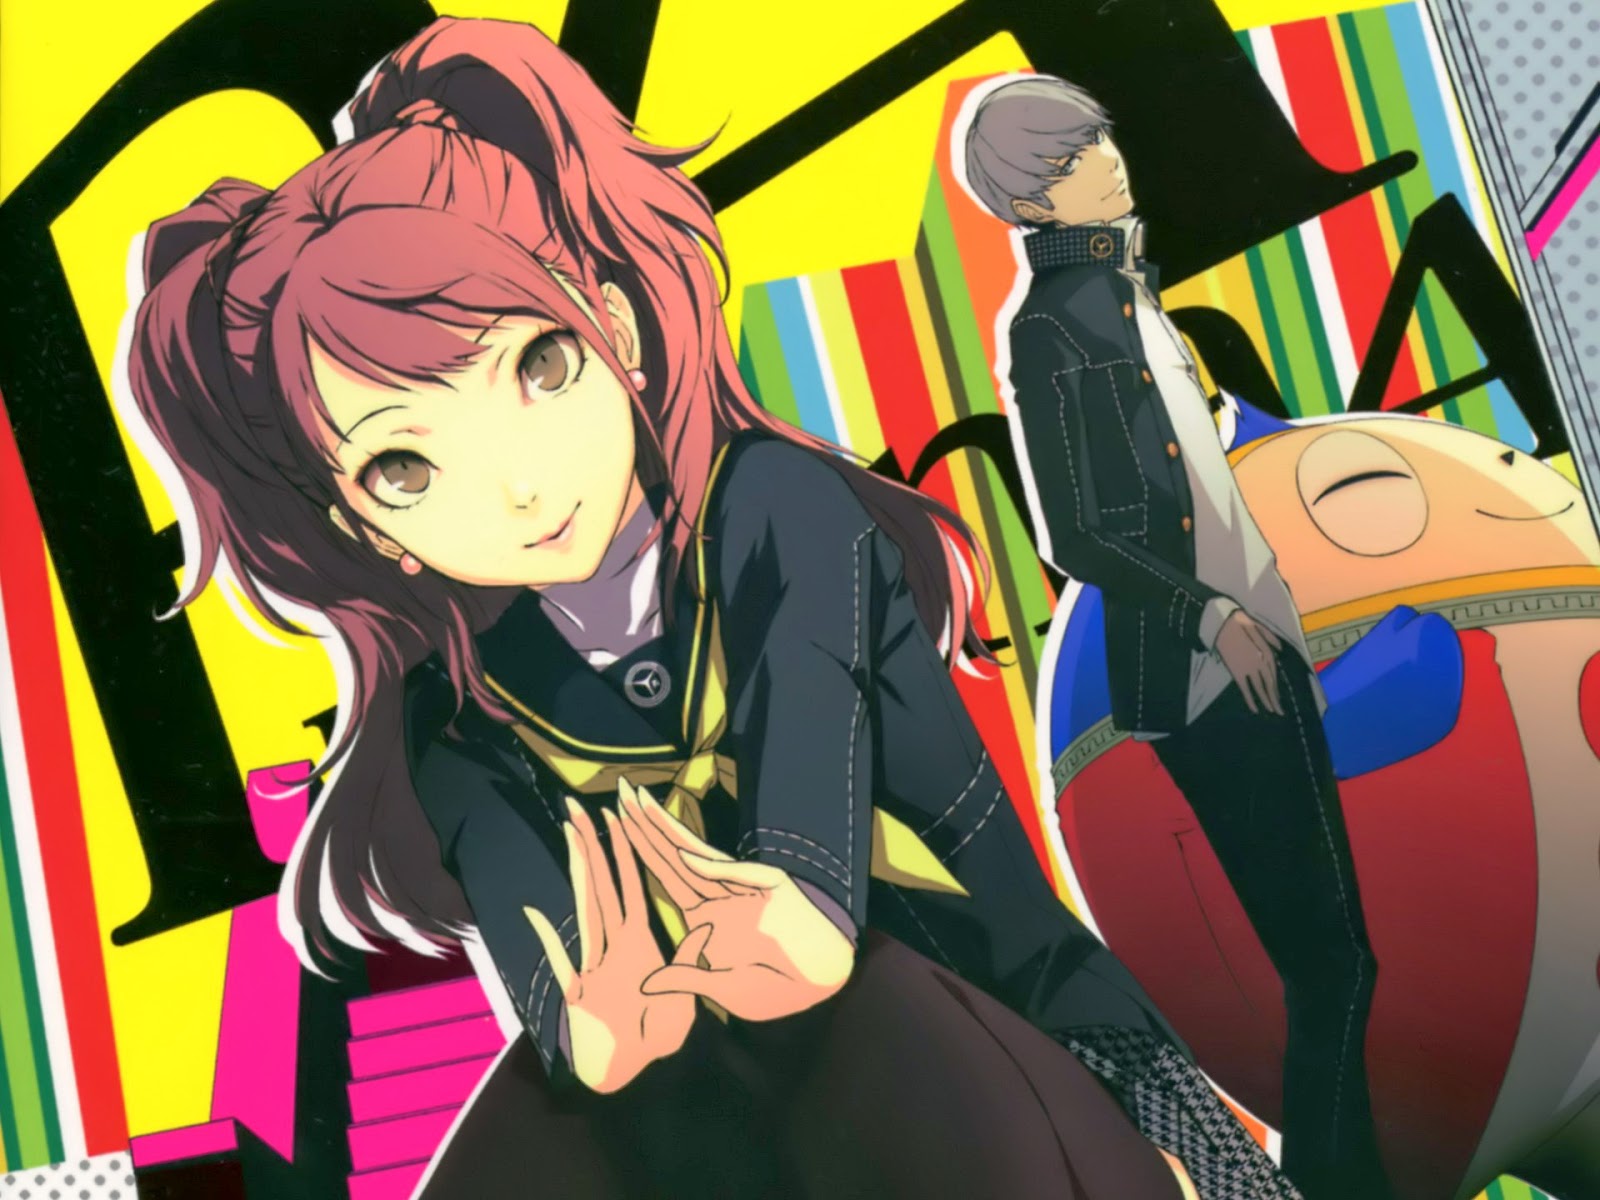 Persona 4 hitting PlayStation 3 on April 8 – Digitally Downloaded